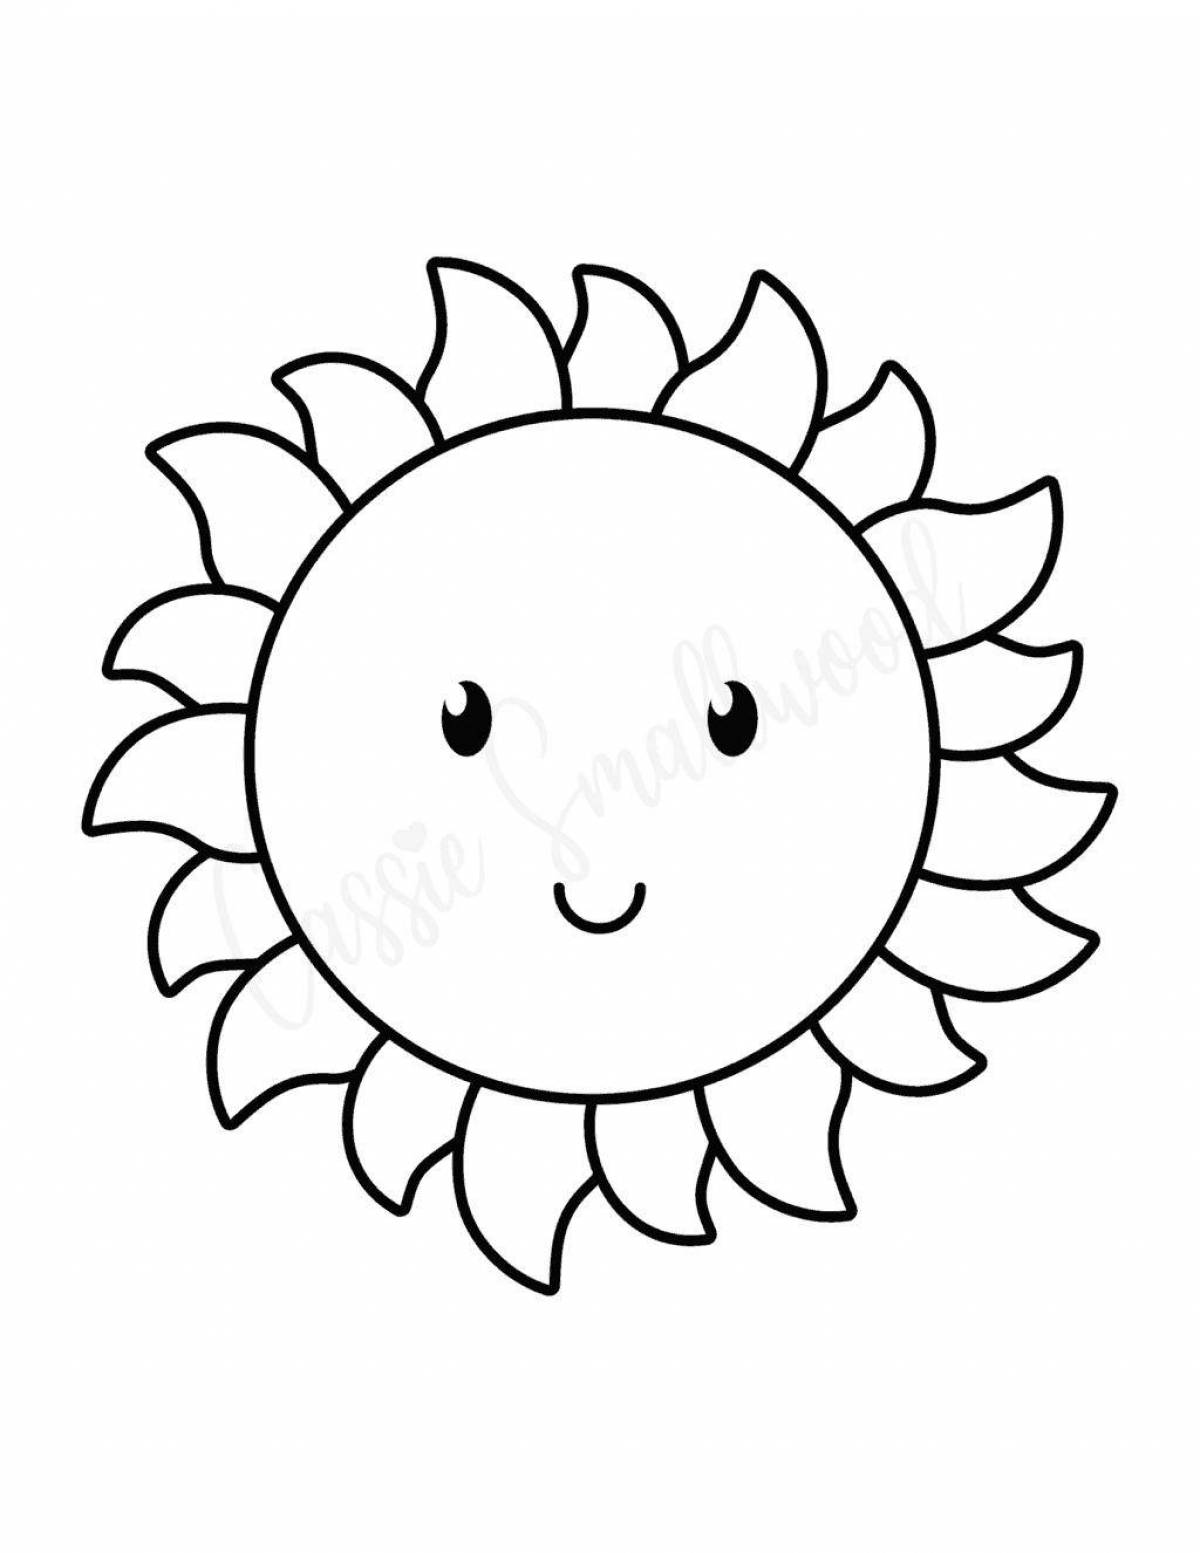 Blooming coloring sun for children 3-4 years old